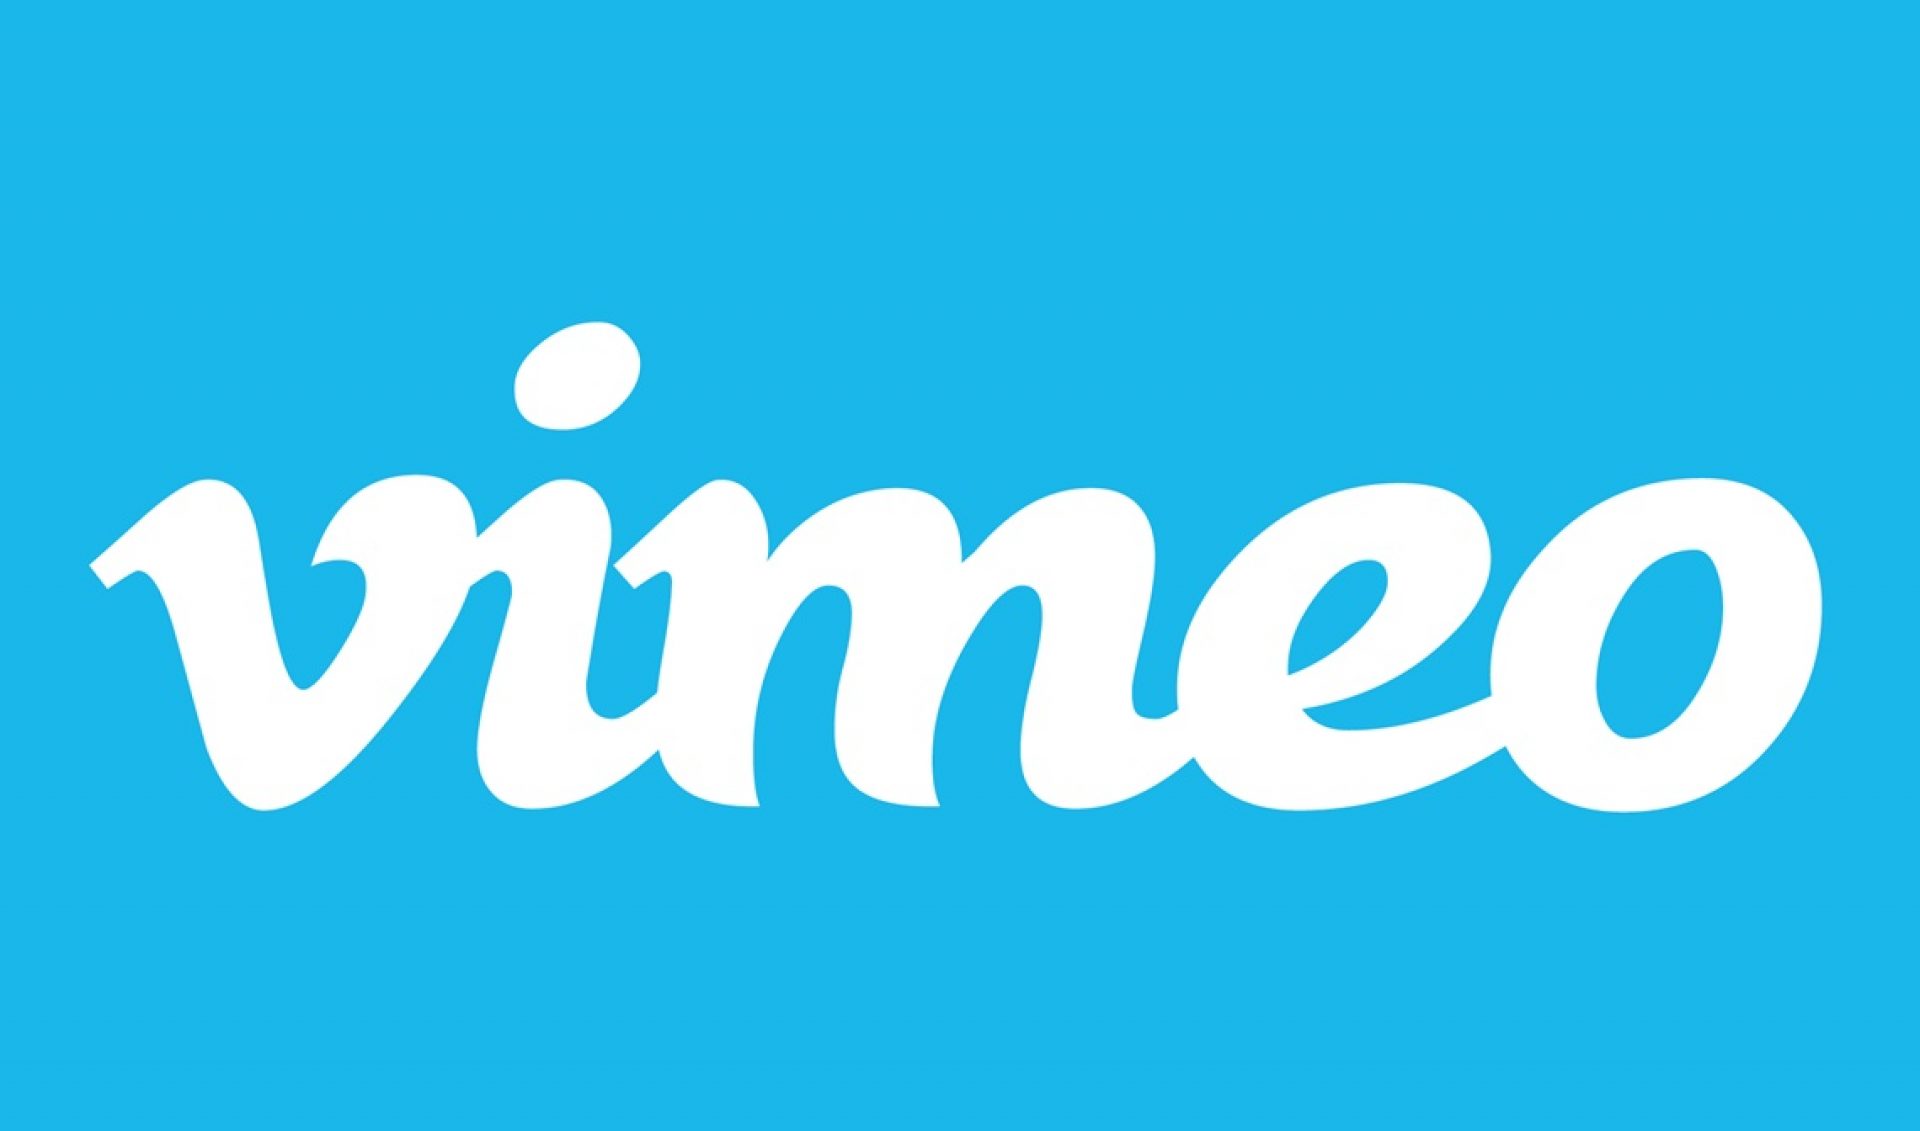 Vimeo Wants To Launch A Subscription Video Service For Its Viewers